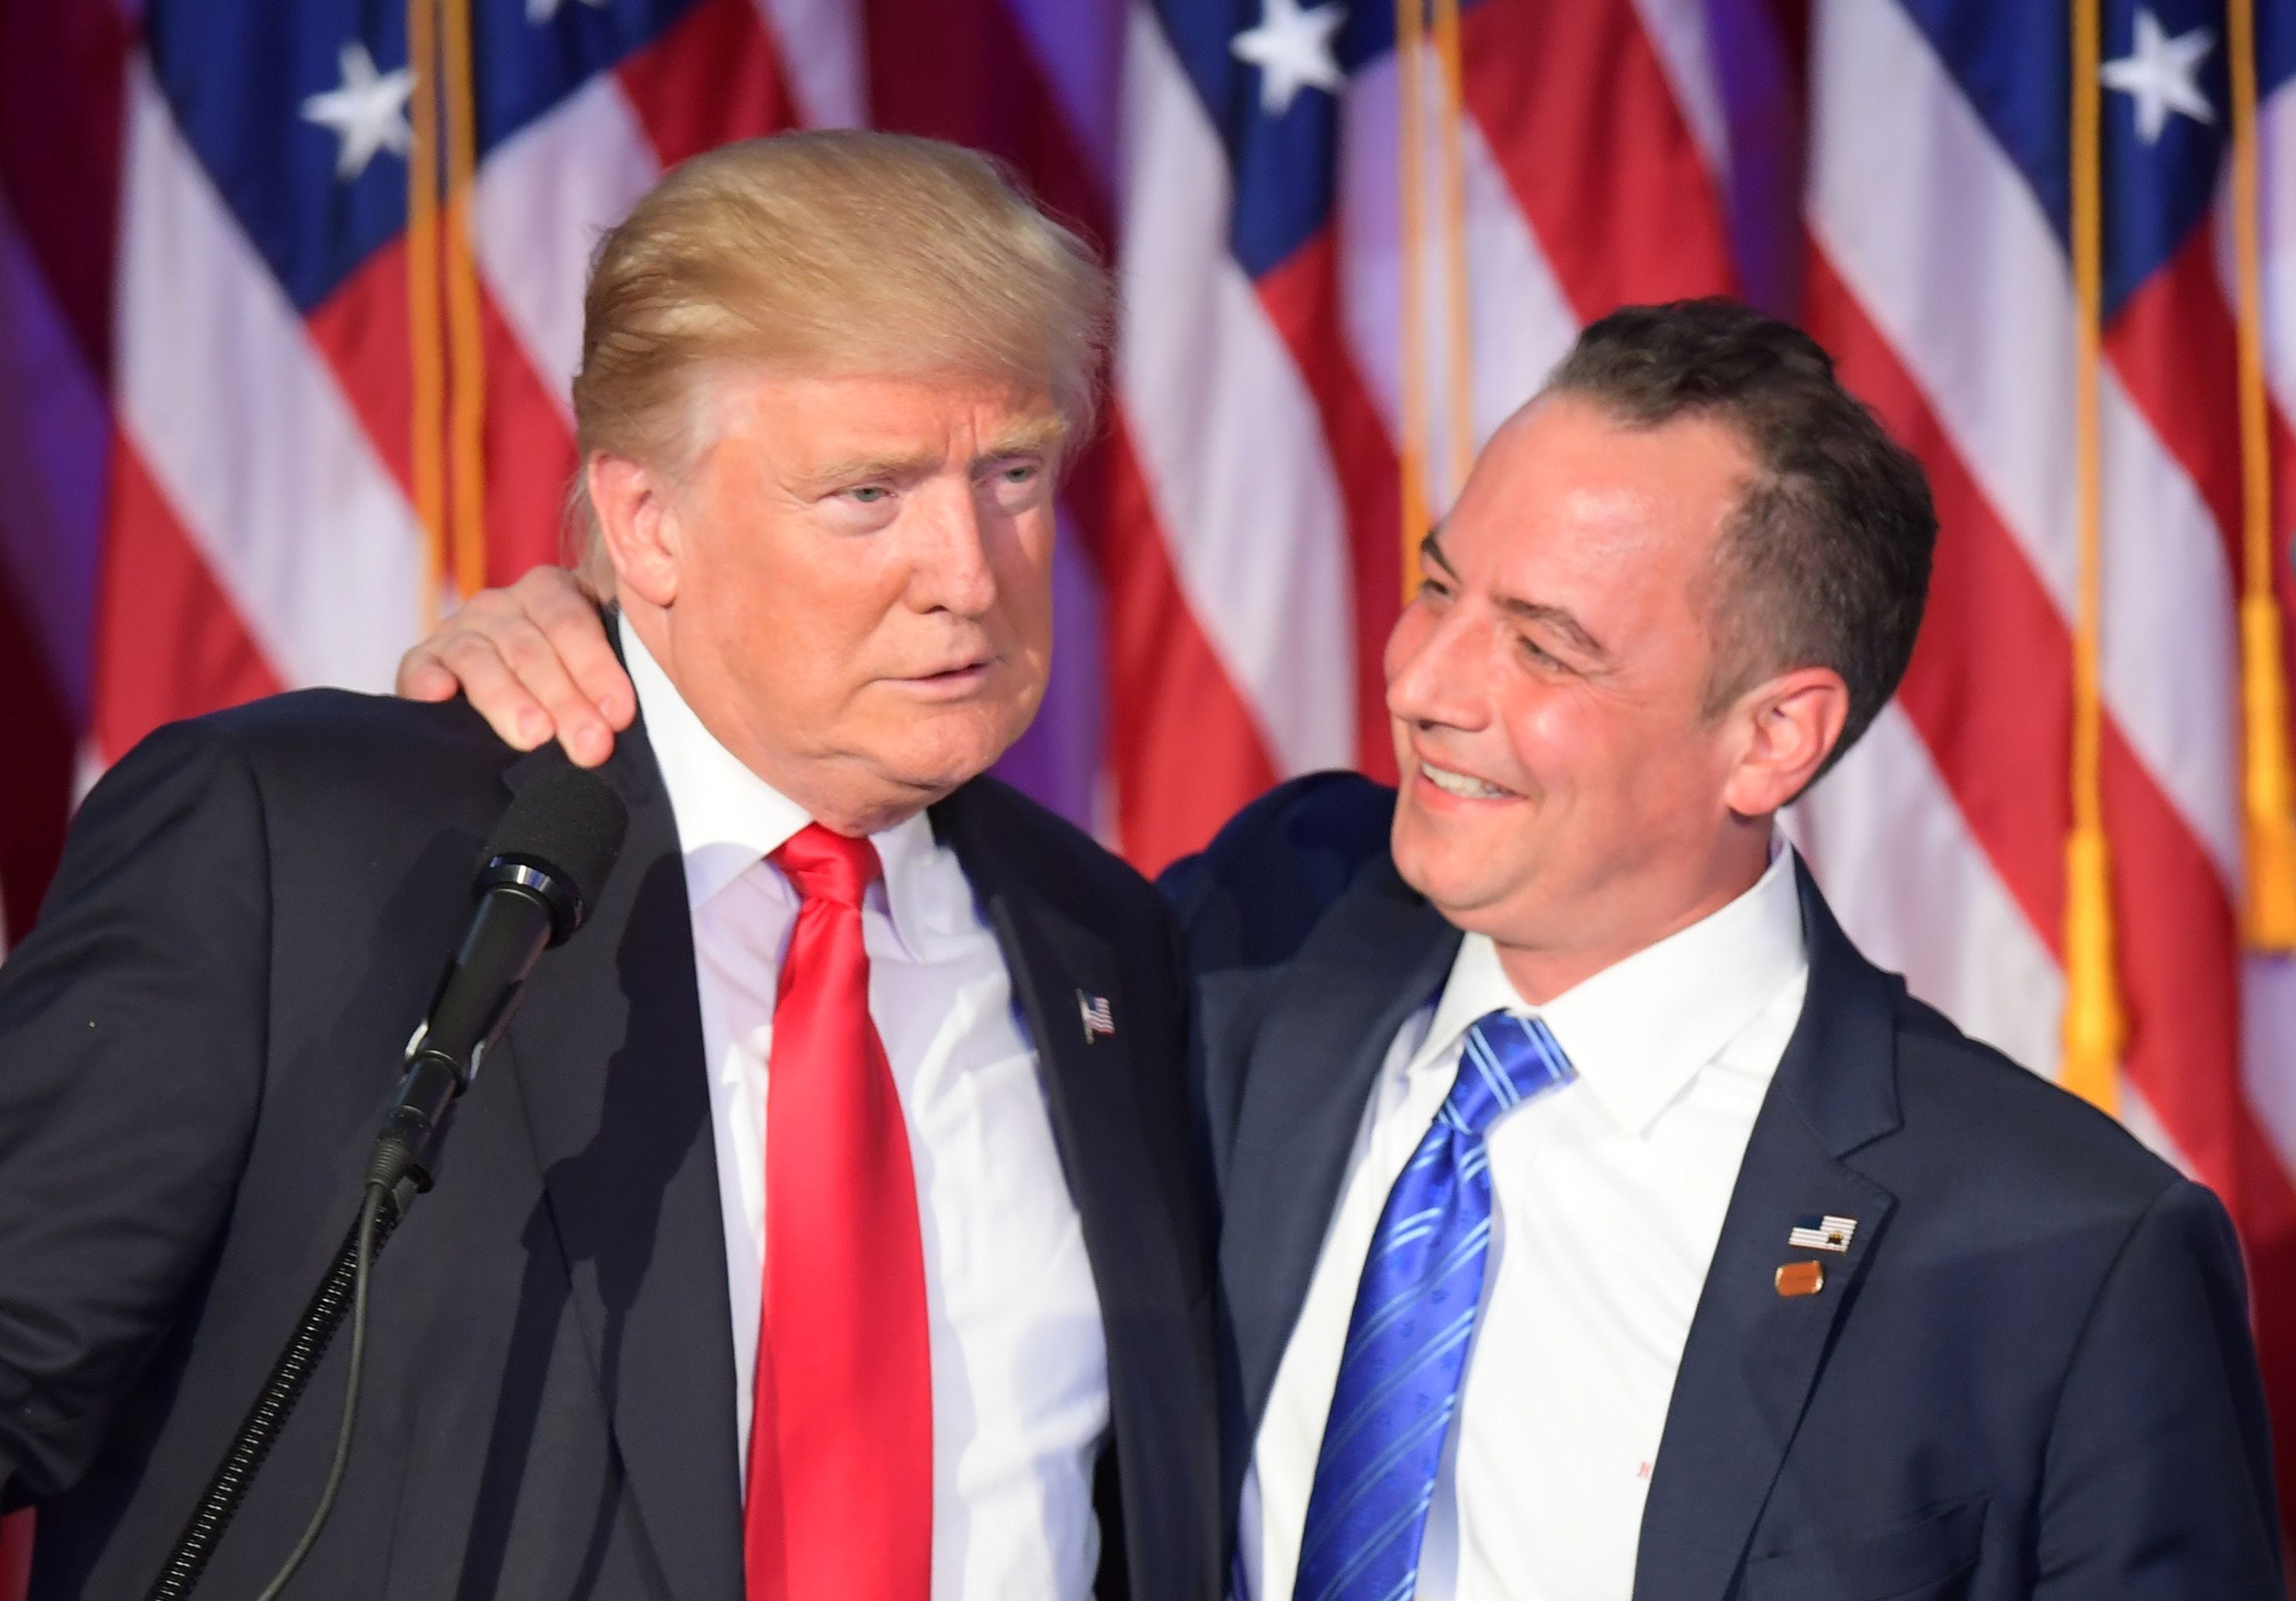 Former Trump chief of staff Reince Priebus to keynote Indiana Chamber dinner